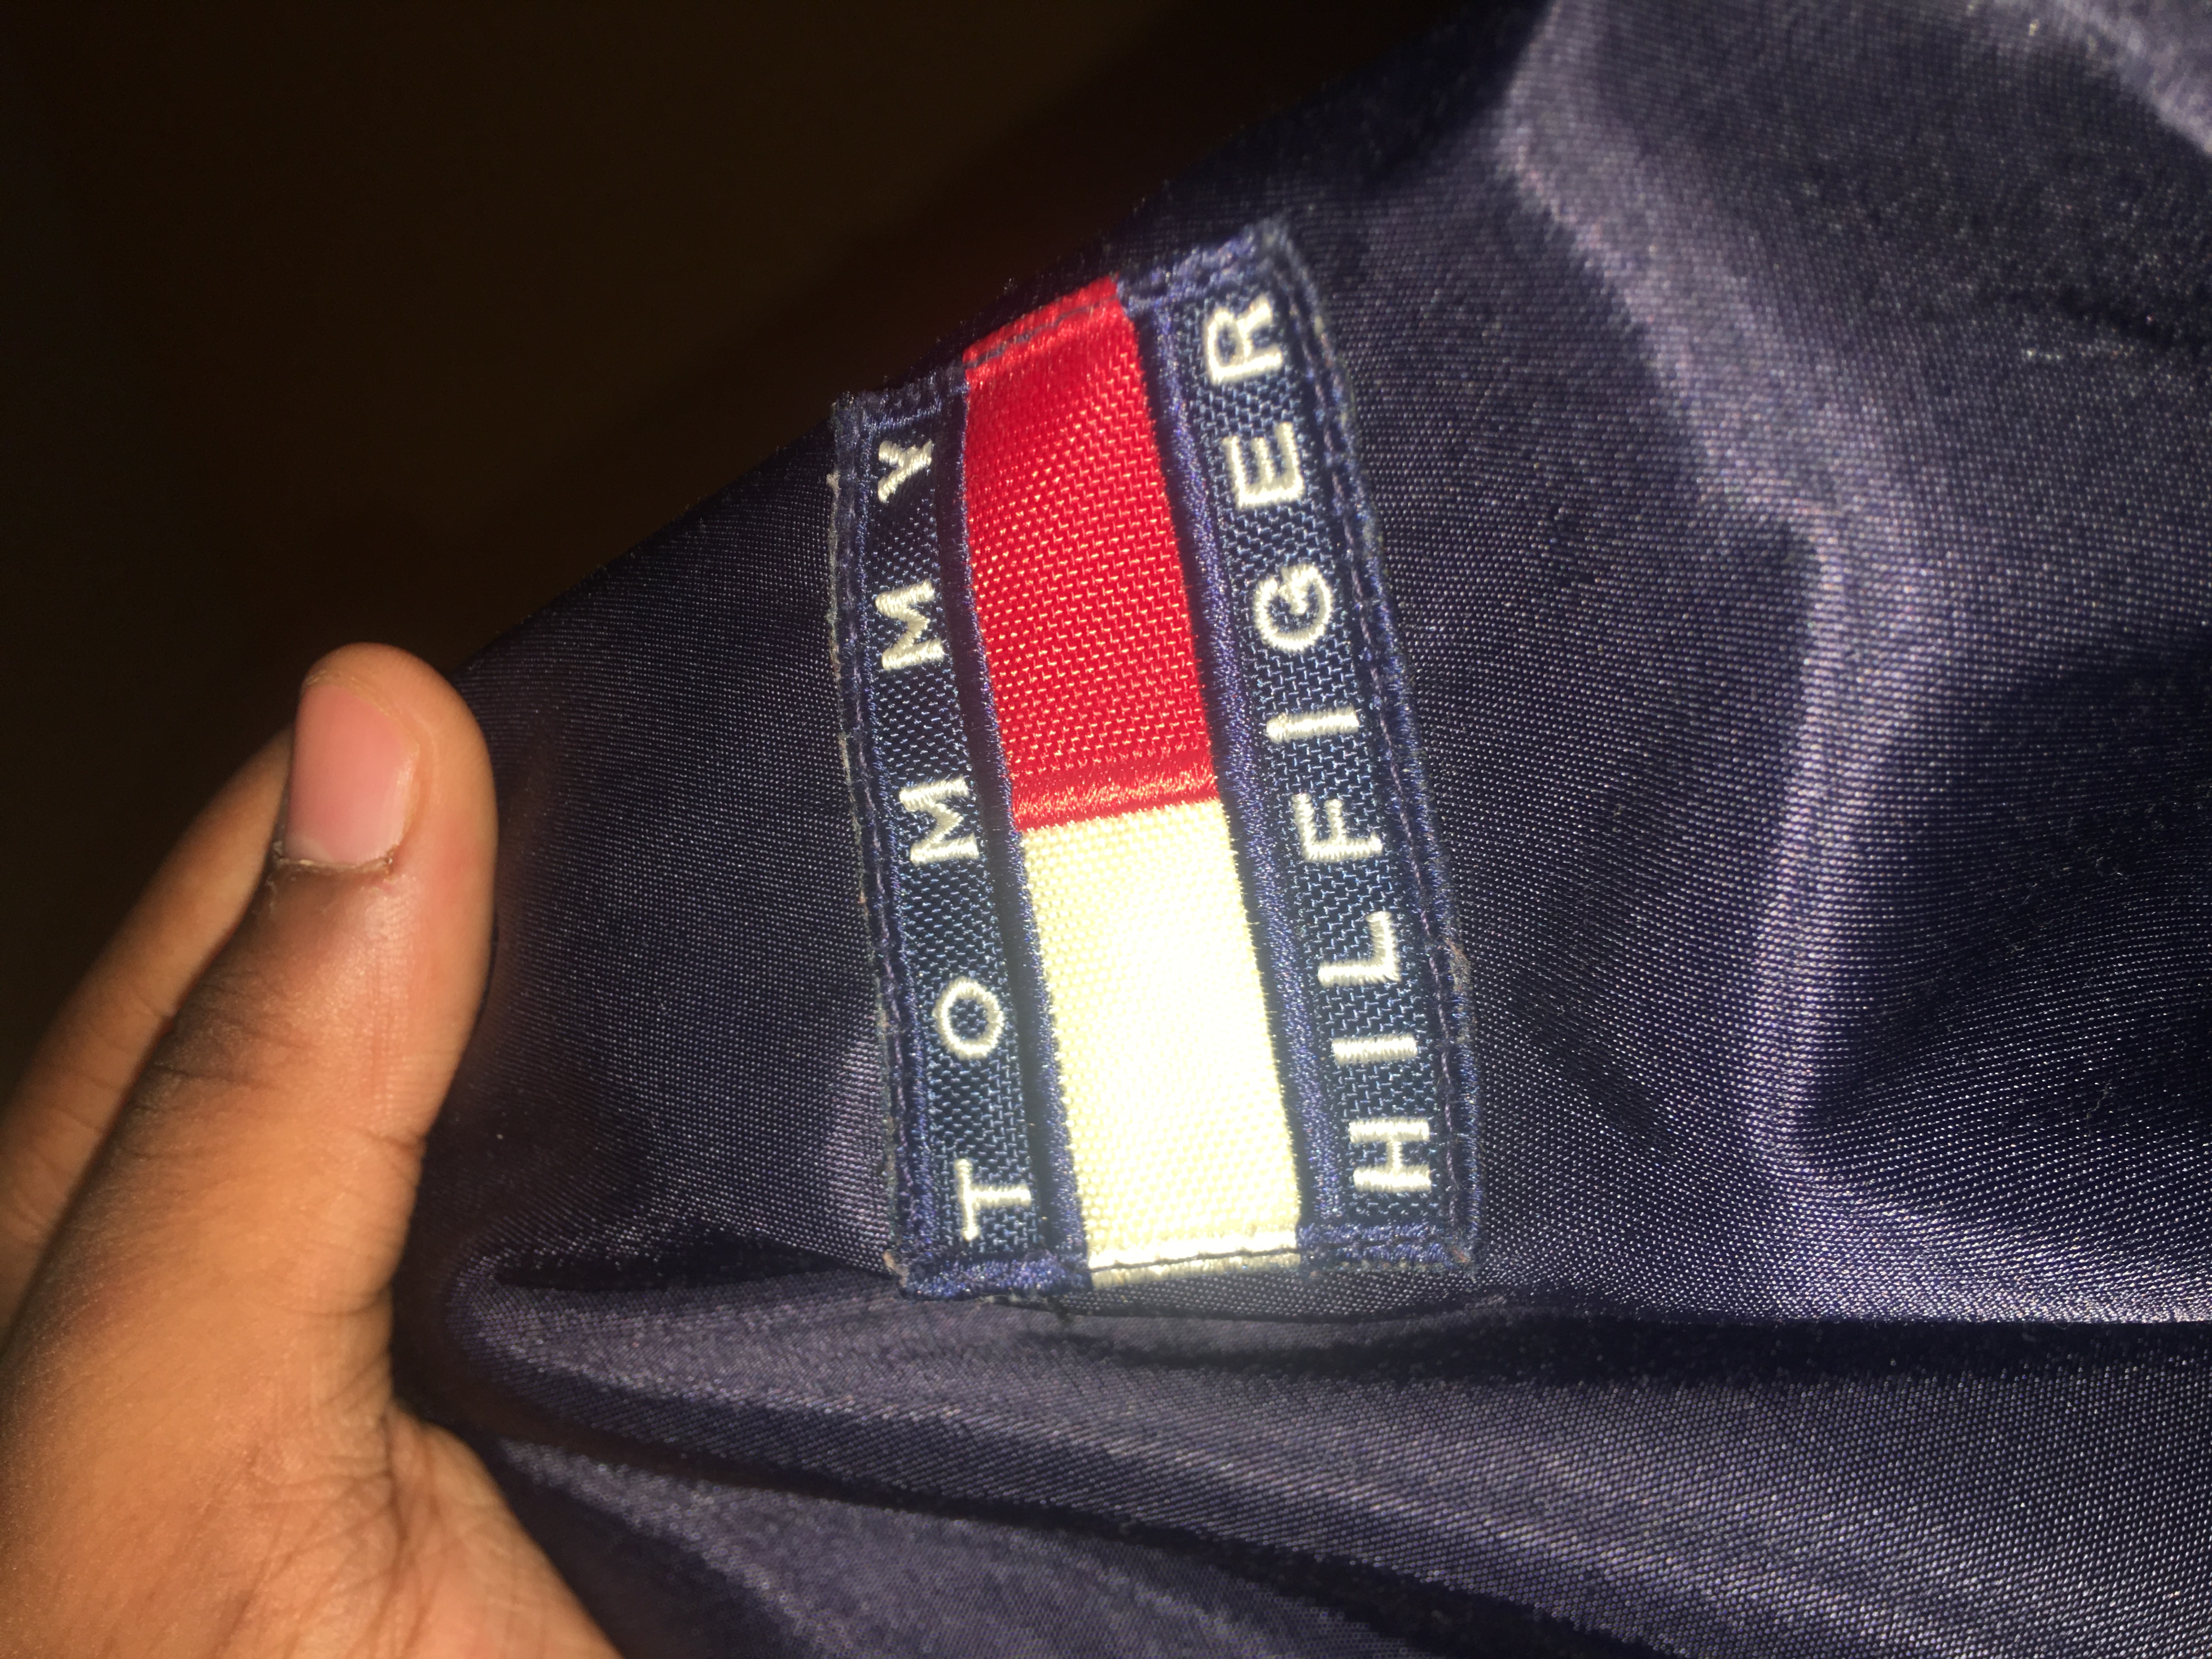 Did waste my money, real? Fake? Tommy jacket - T-Shirt Forum & Community